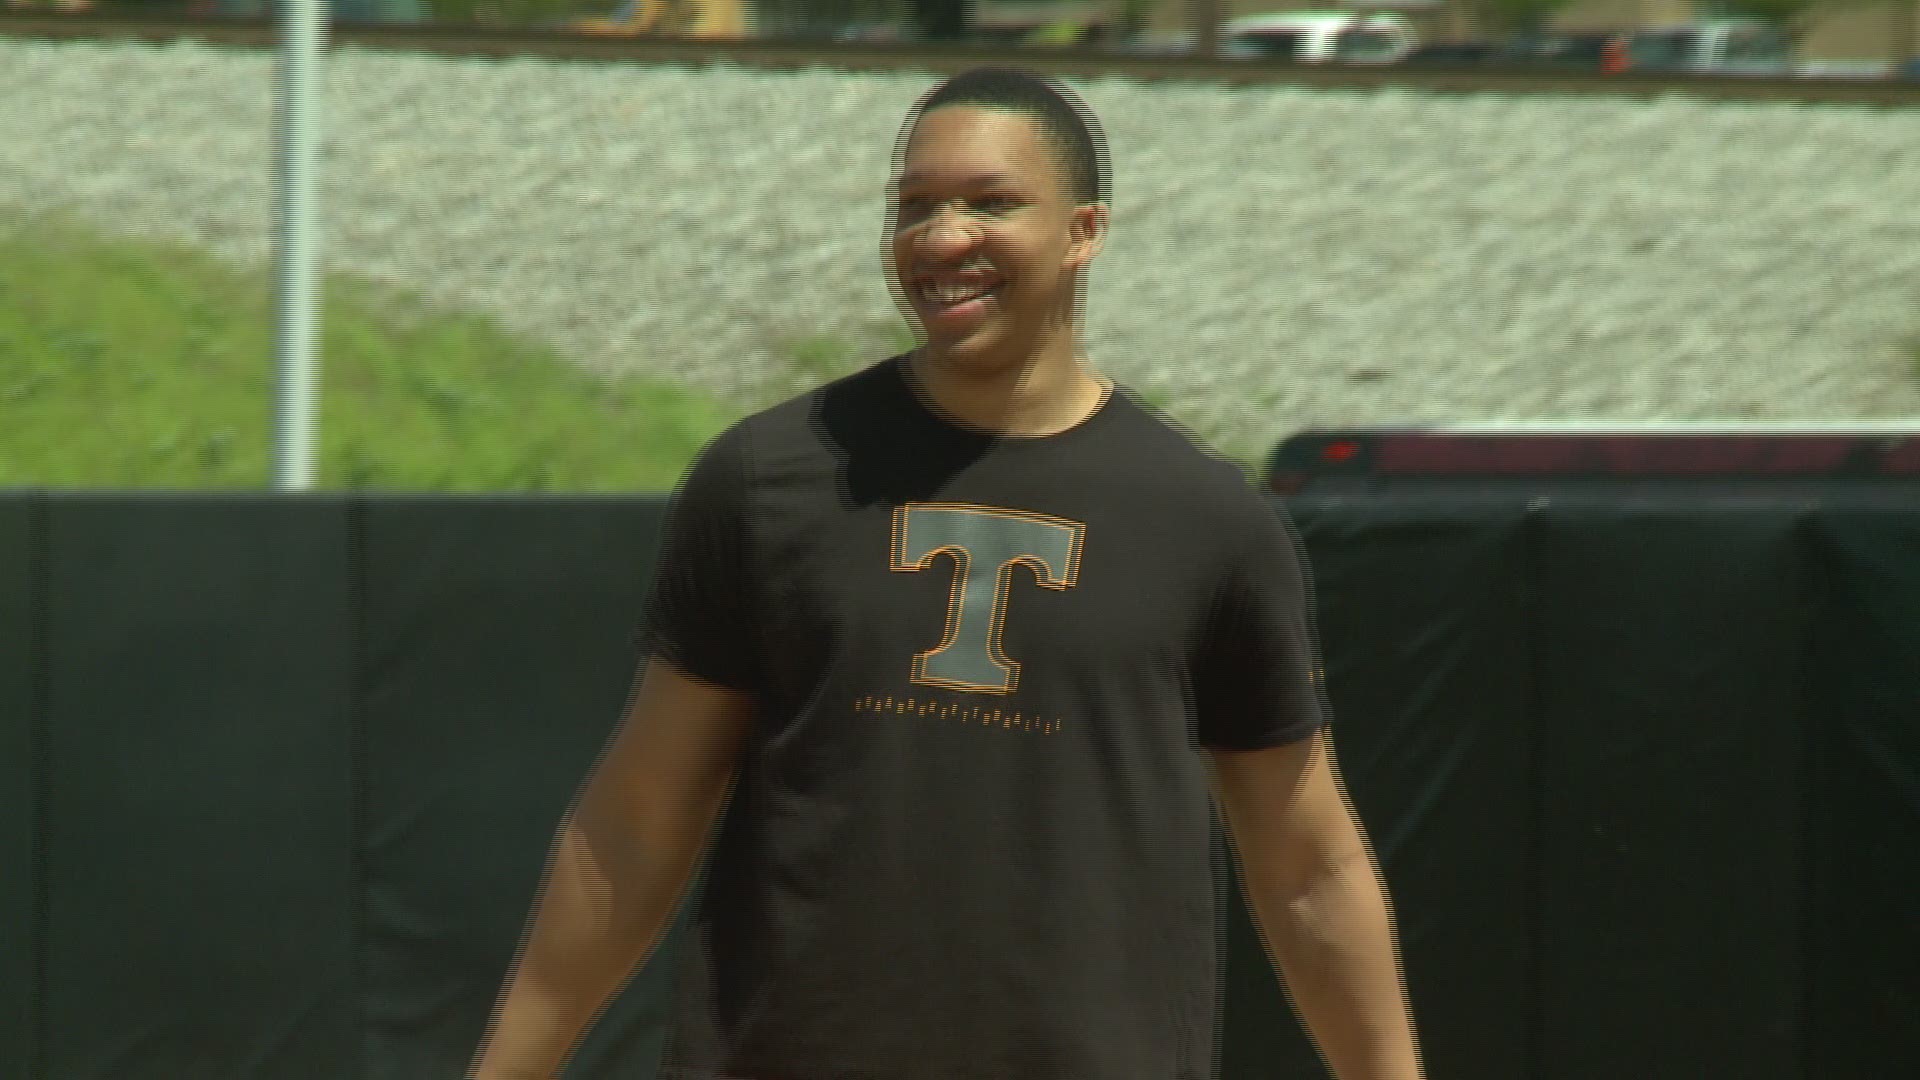 Grant Williams tries his best to throw a strike during the ceremonial first pitch during the Lady Vols game against Mississippi State.